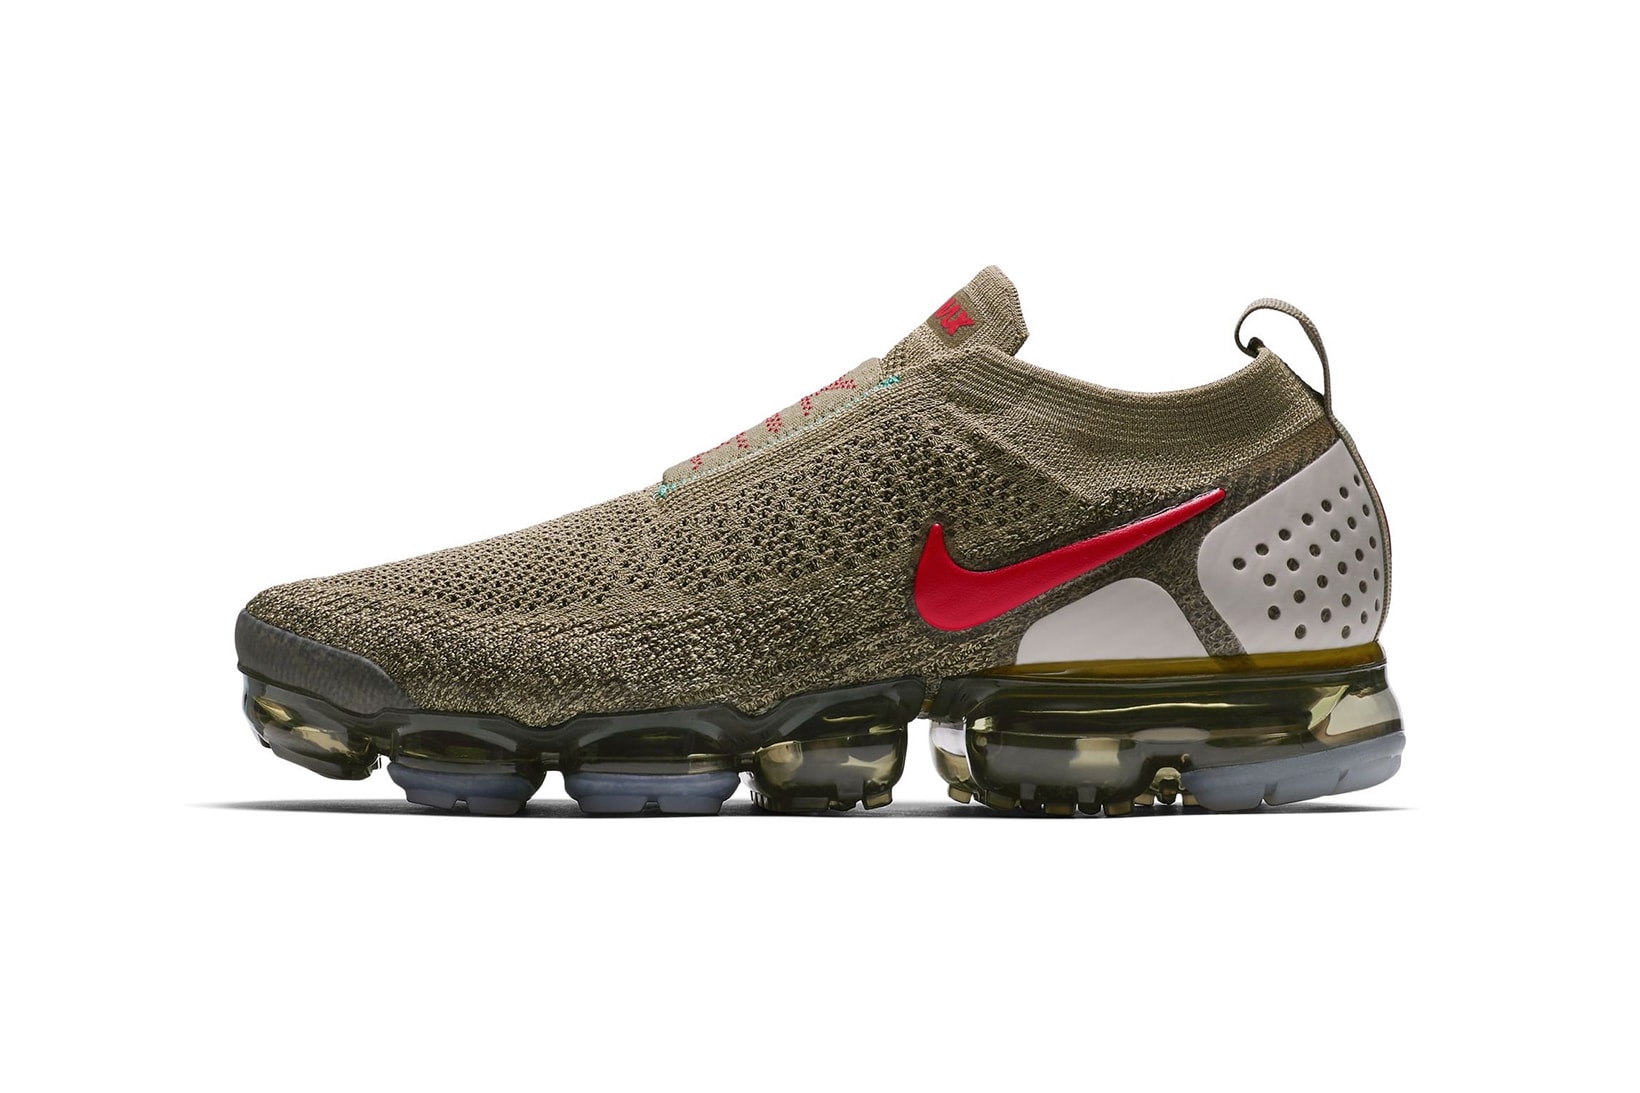 Nike Air VaporMax Moc 2 Olive Red spring summer april 2018 release date info drop sneakers shoes footwear